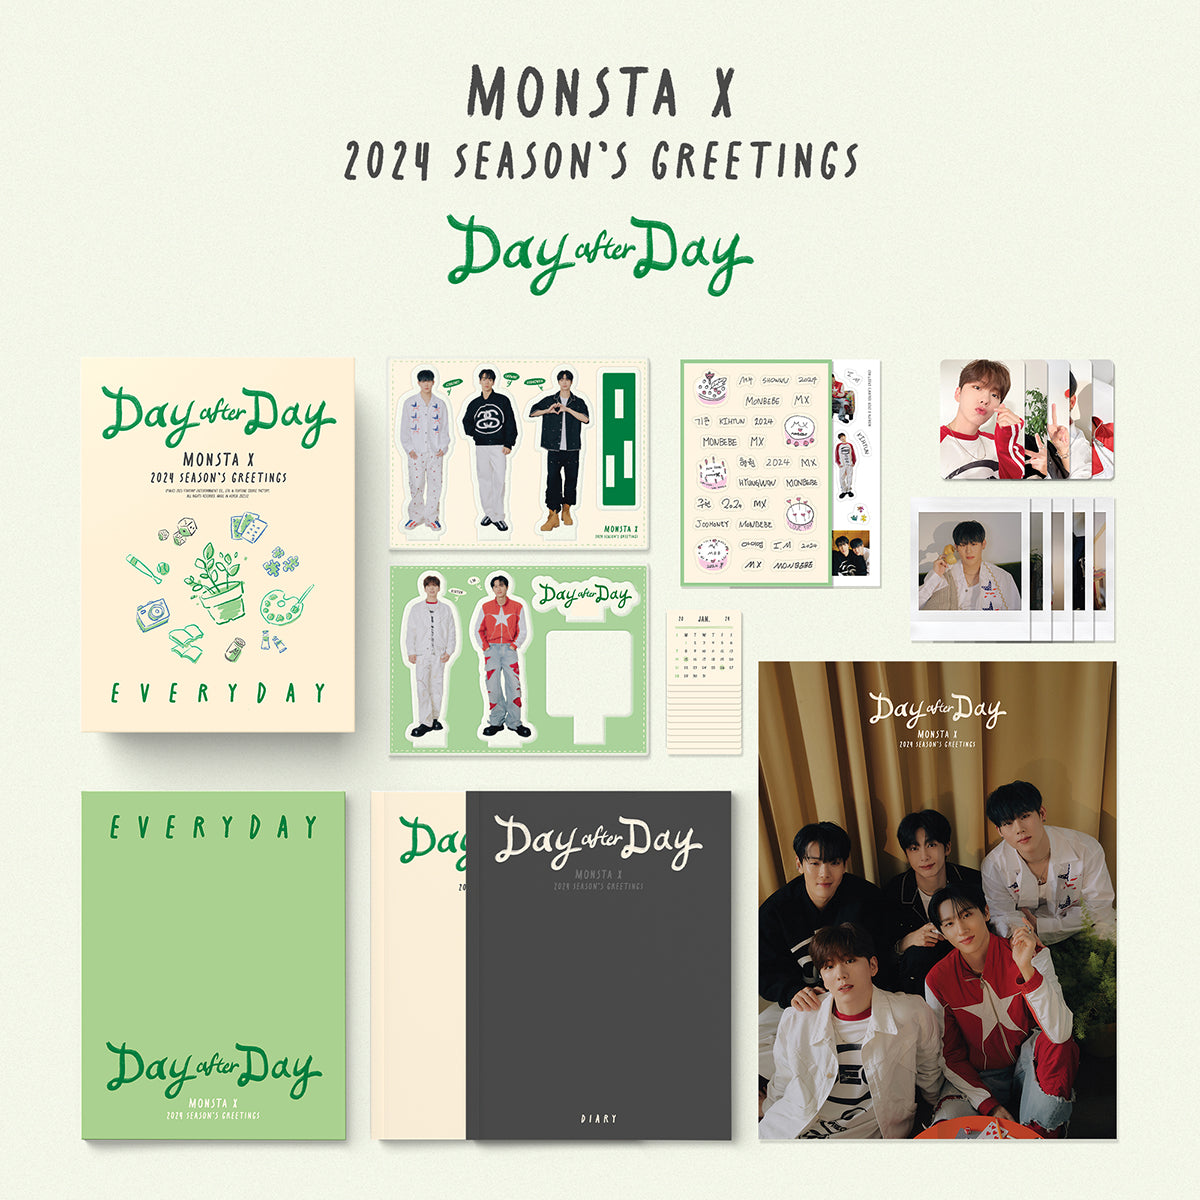 MONSTA X - 2024 SEASON'S GREETINGS [Day after Day] (EVERYDAY ver.) [PRE-ORDER]